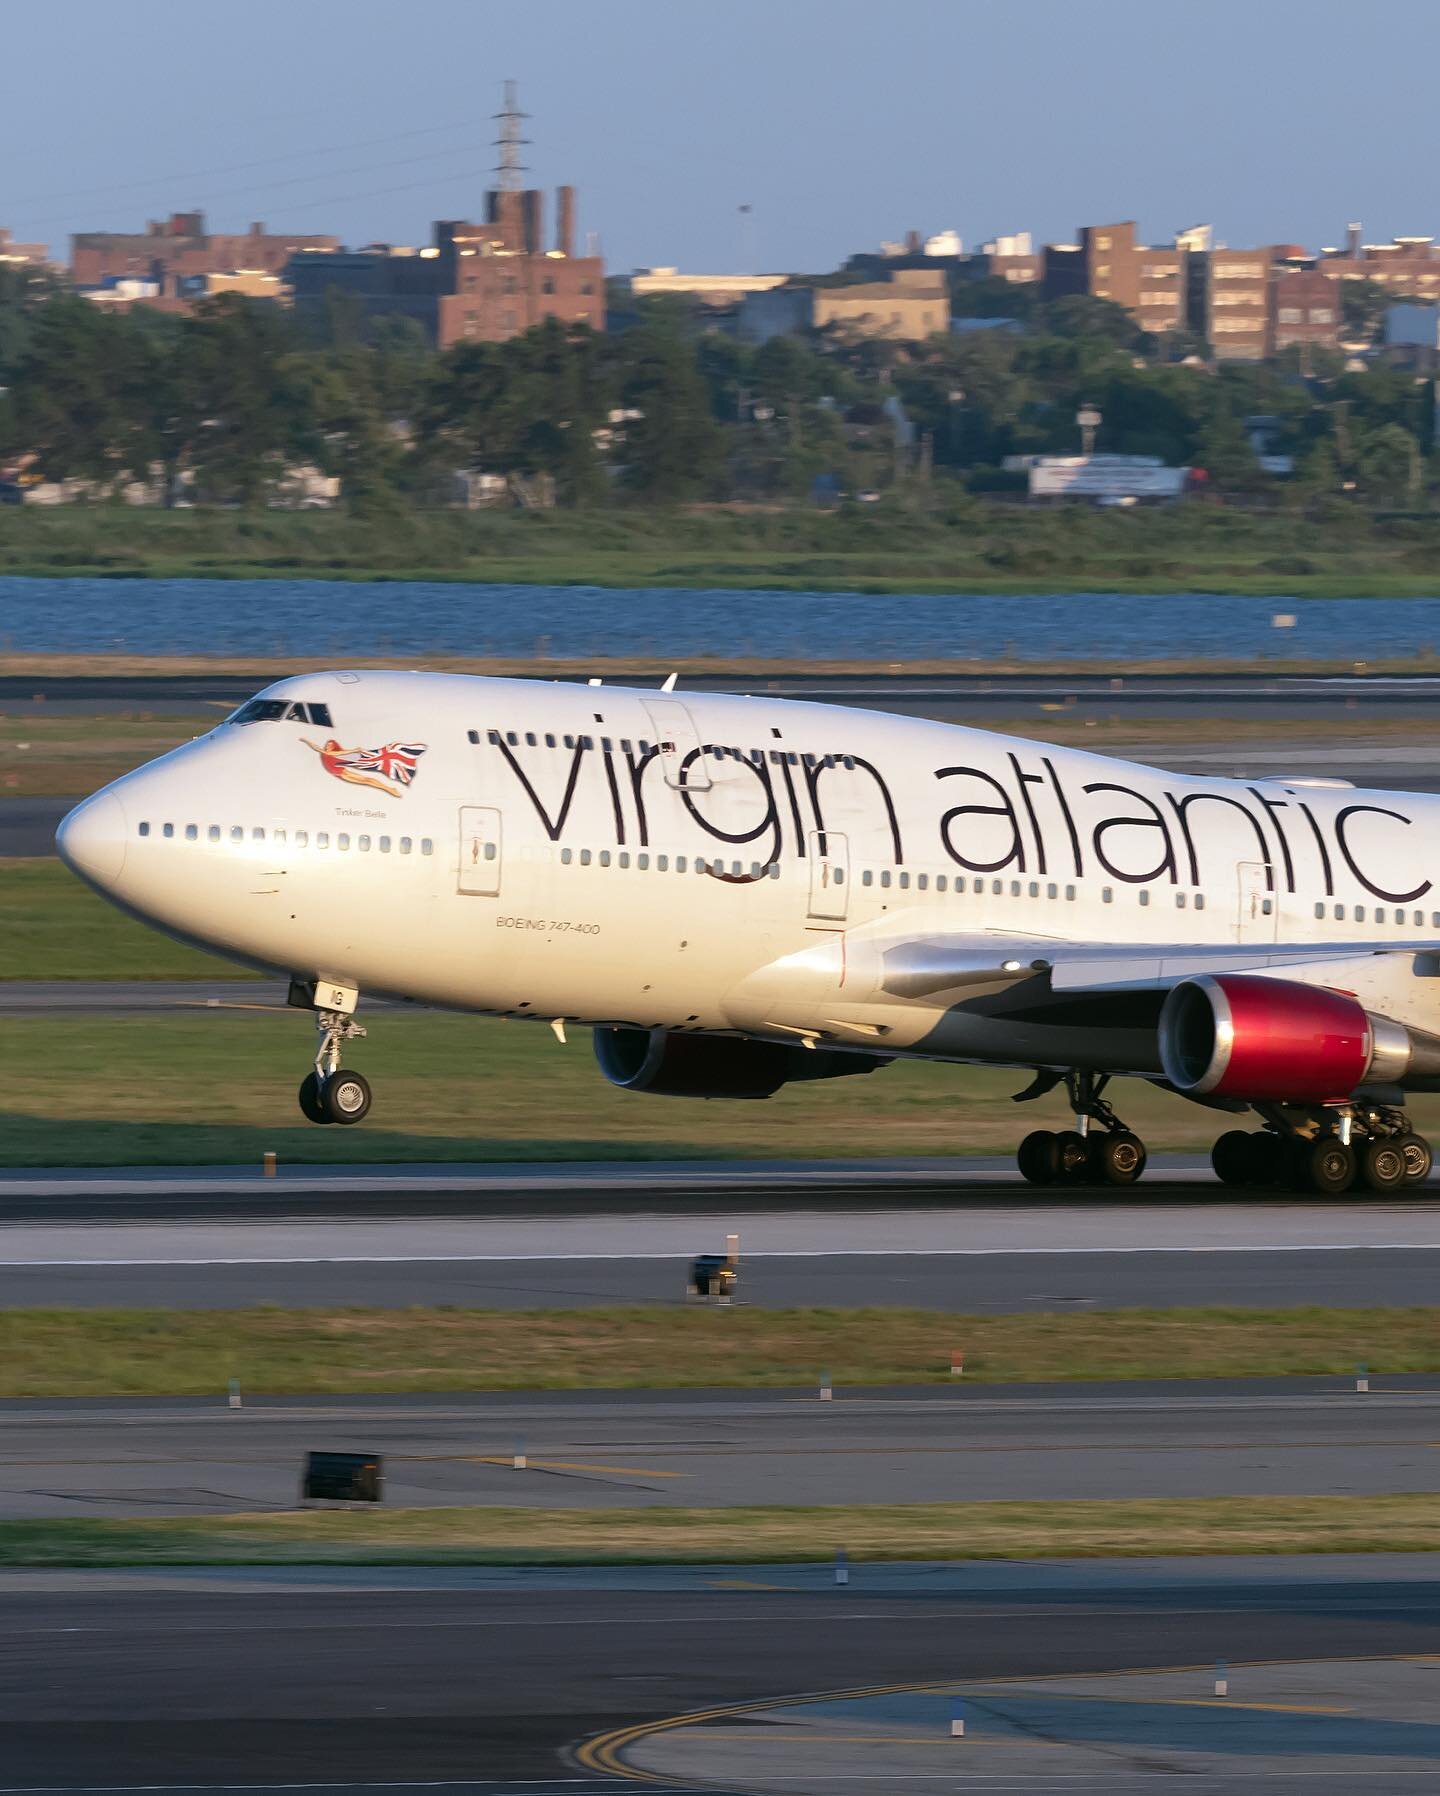 I have dozens of JFK rotation shots that I have yet to post. Being that a number of them are airplanes no longer in service, I wanted to start posting them for all to enjoy. Here&rsquo;s a now retired Virgin Atlantic Boeing 747-400 rotating beautiful